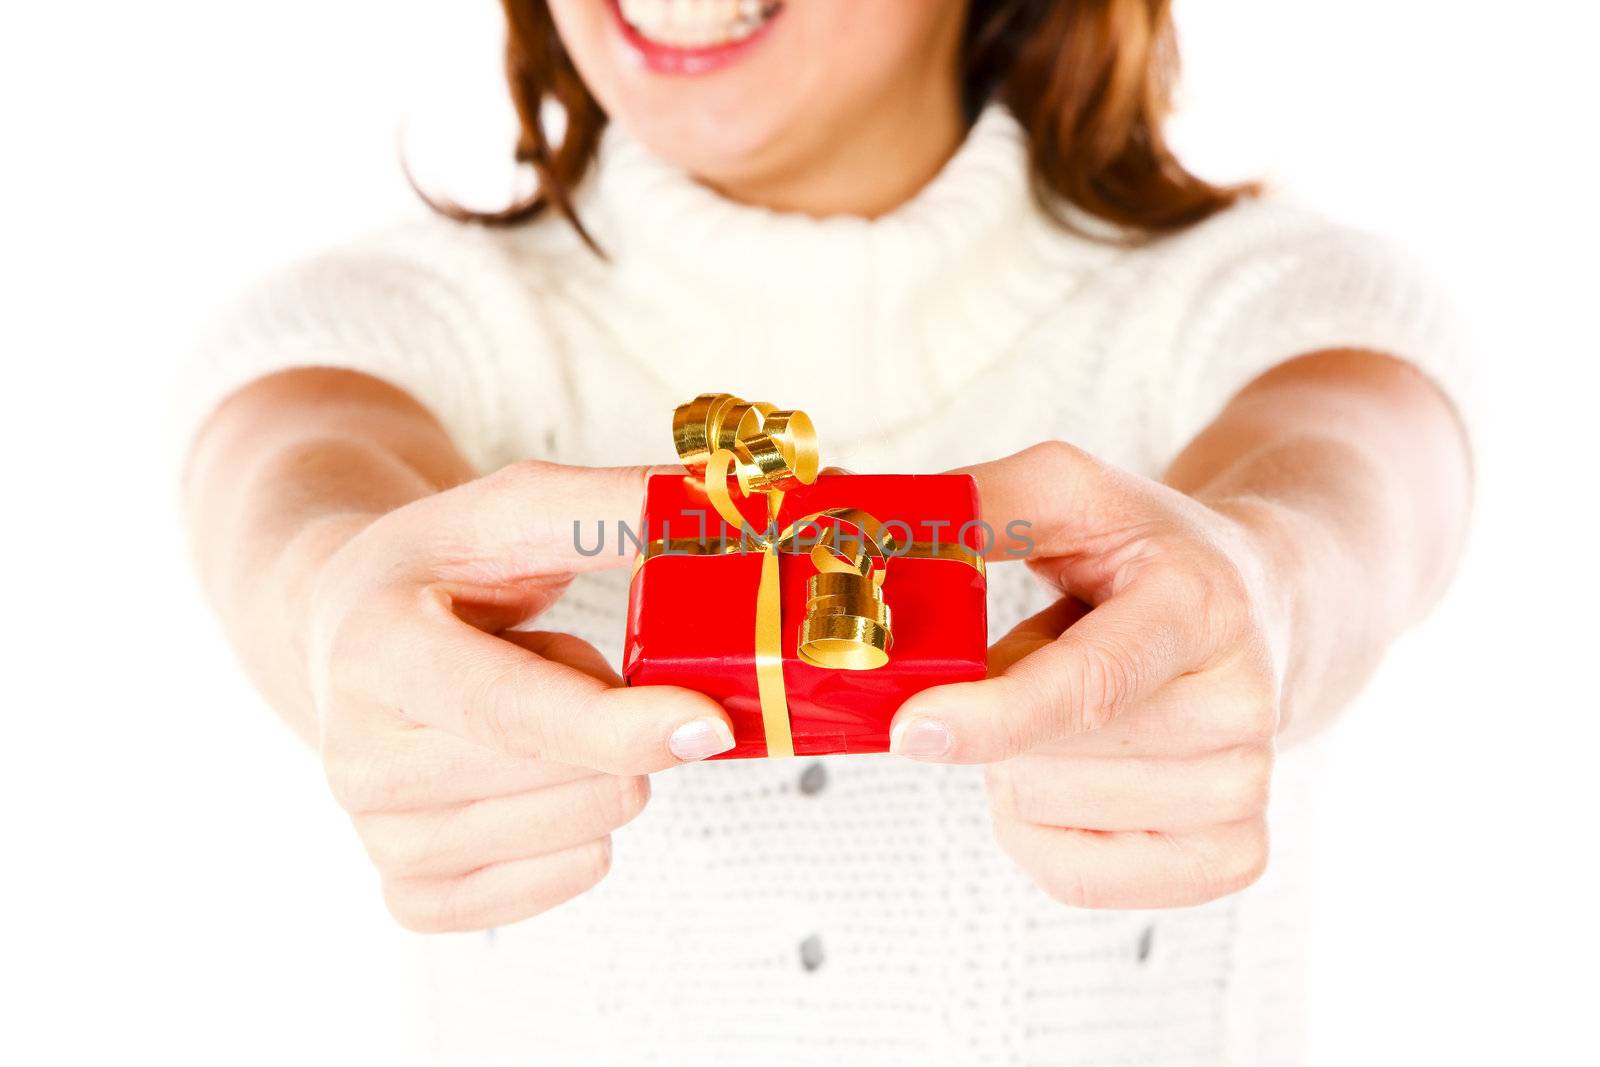 Conceptual Closeup Photo Of A Cute Smiling Woman Offering A present